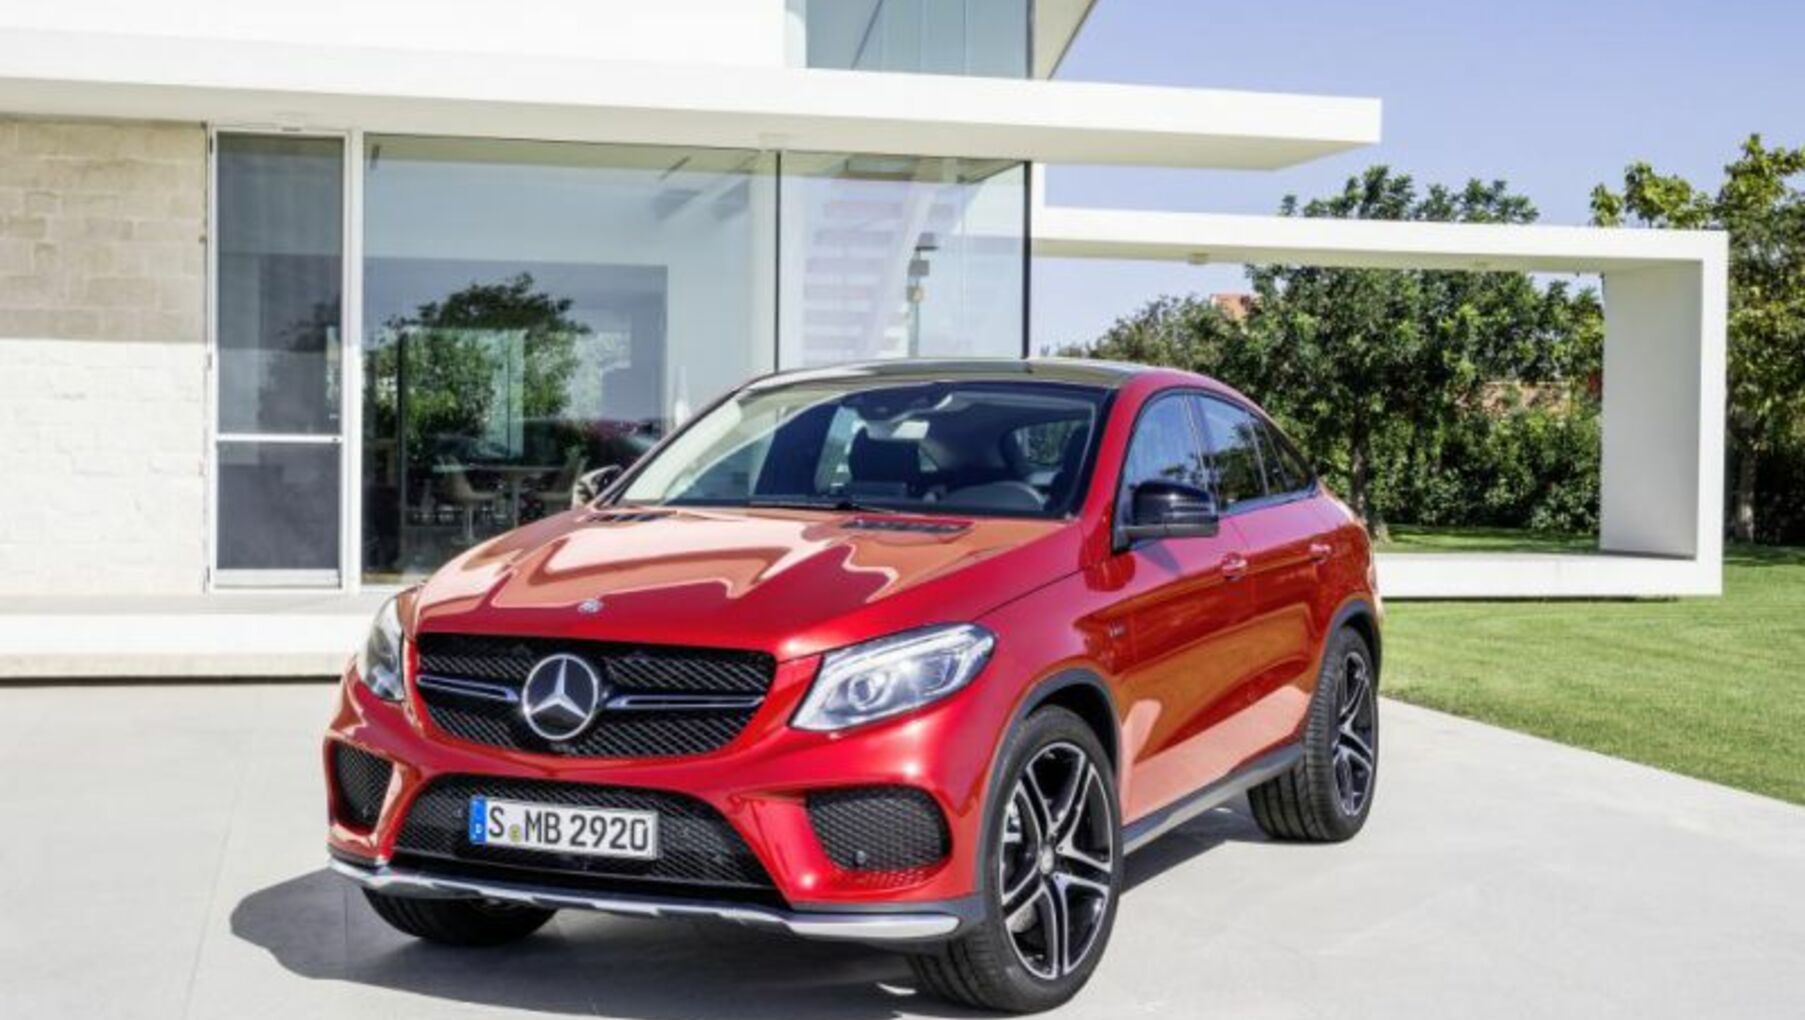 Mercedes-Benz GLE Coupe (C292) AMG GLE 63 S (585 Hp) 4MATIC G-TRONIC 2015, 2016, 2017, 2018, 2019, 2020, 2021 